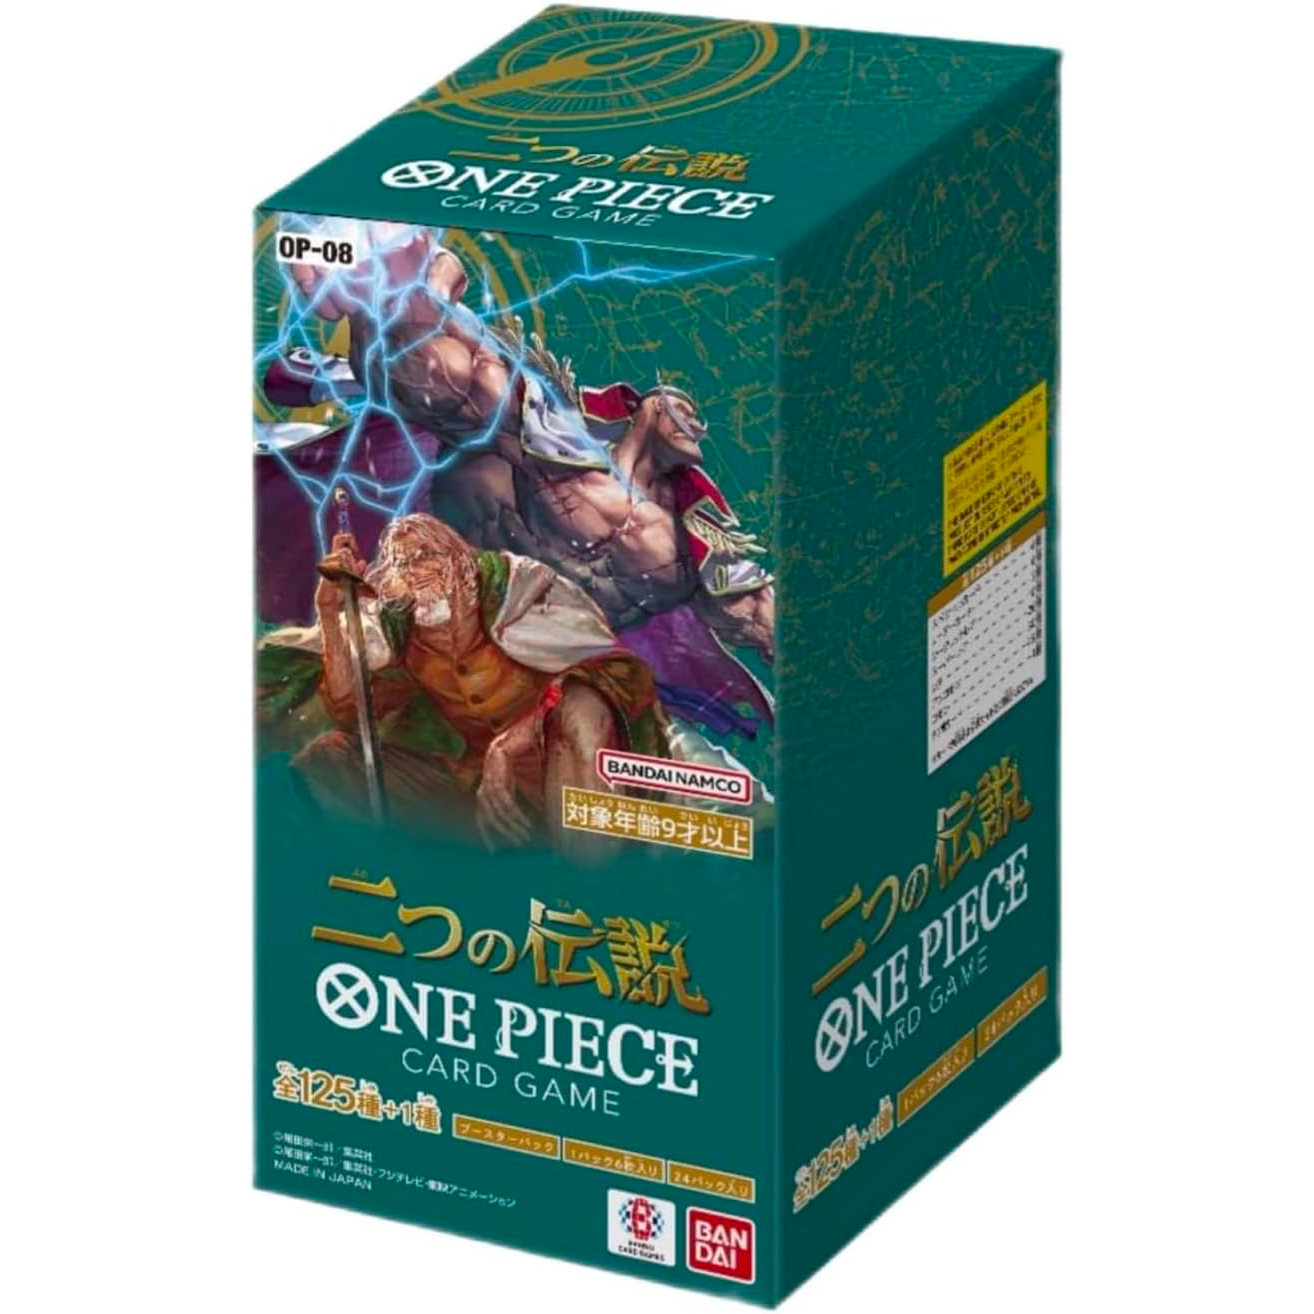 [OP-08] ONE PIECE CARD GAME Booster Pack ｢Two Legends｣ Box Cardotaku